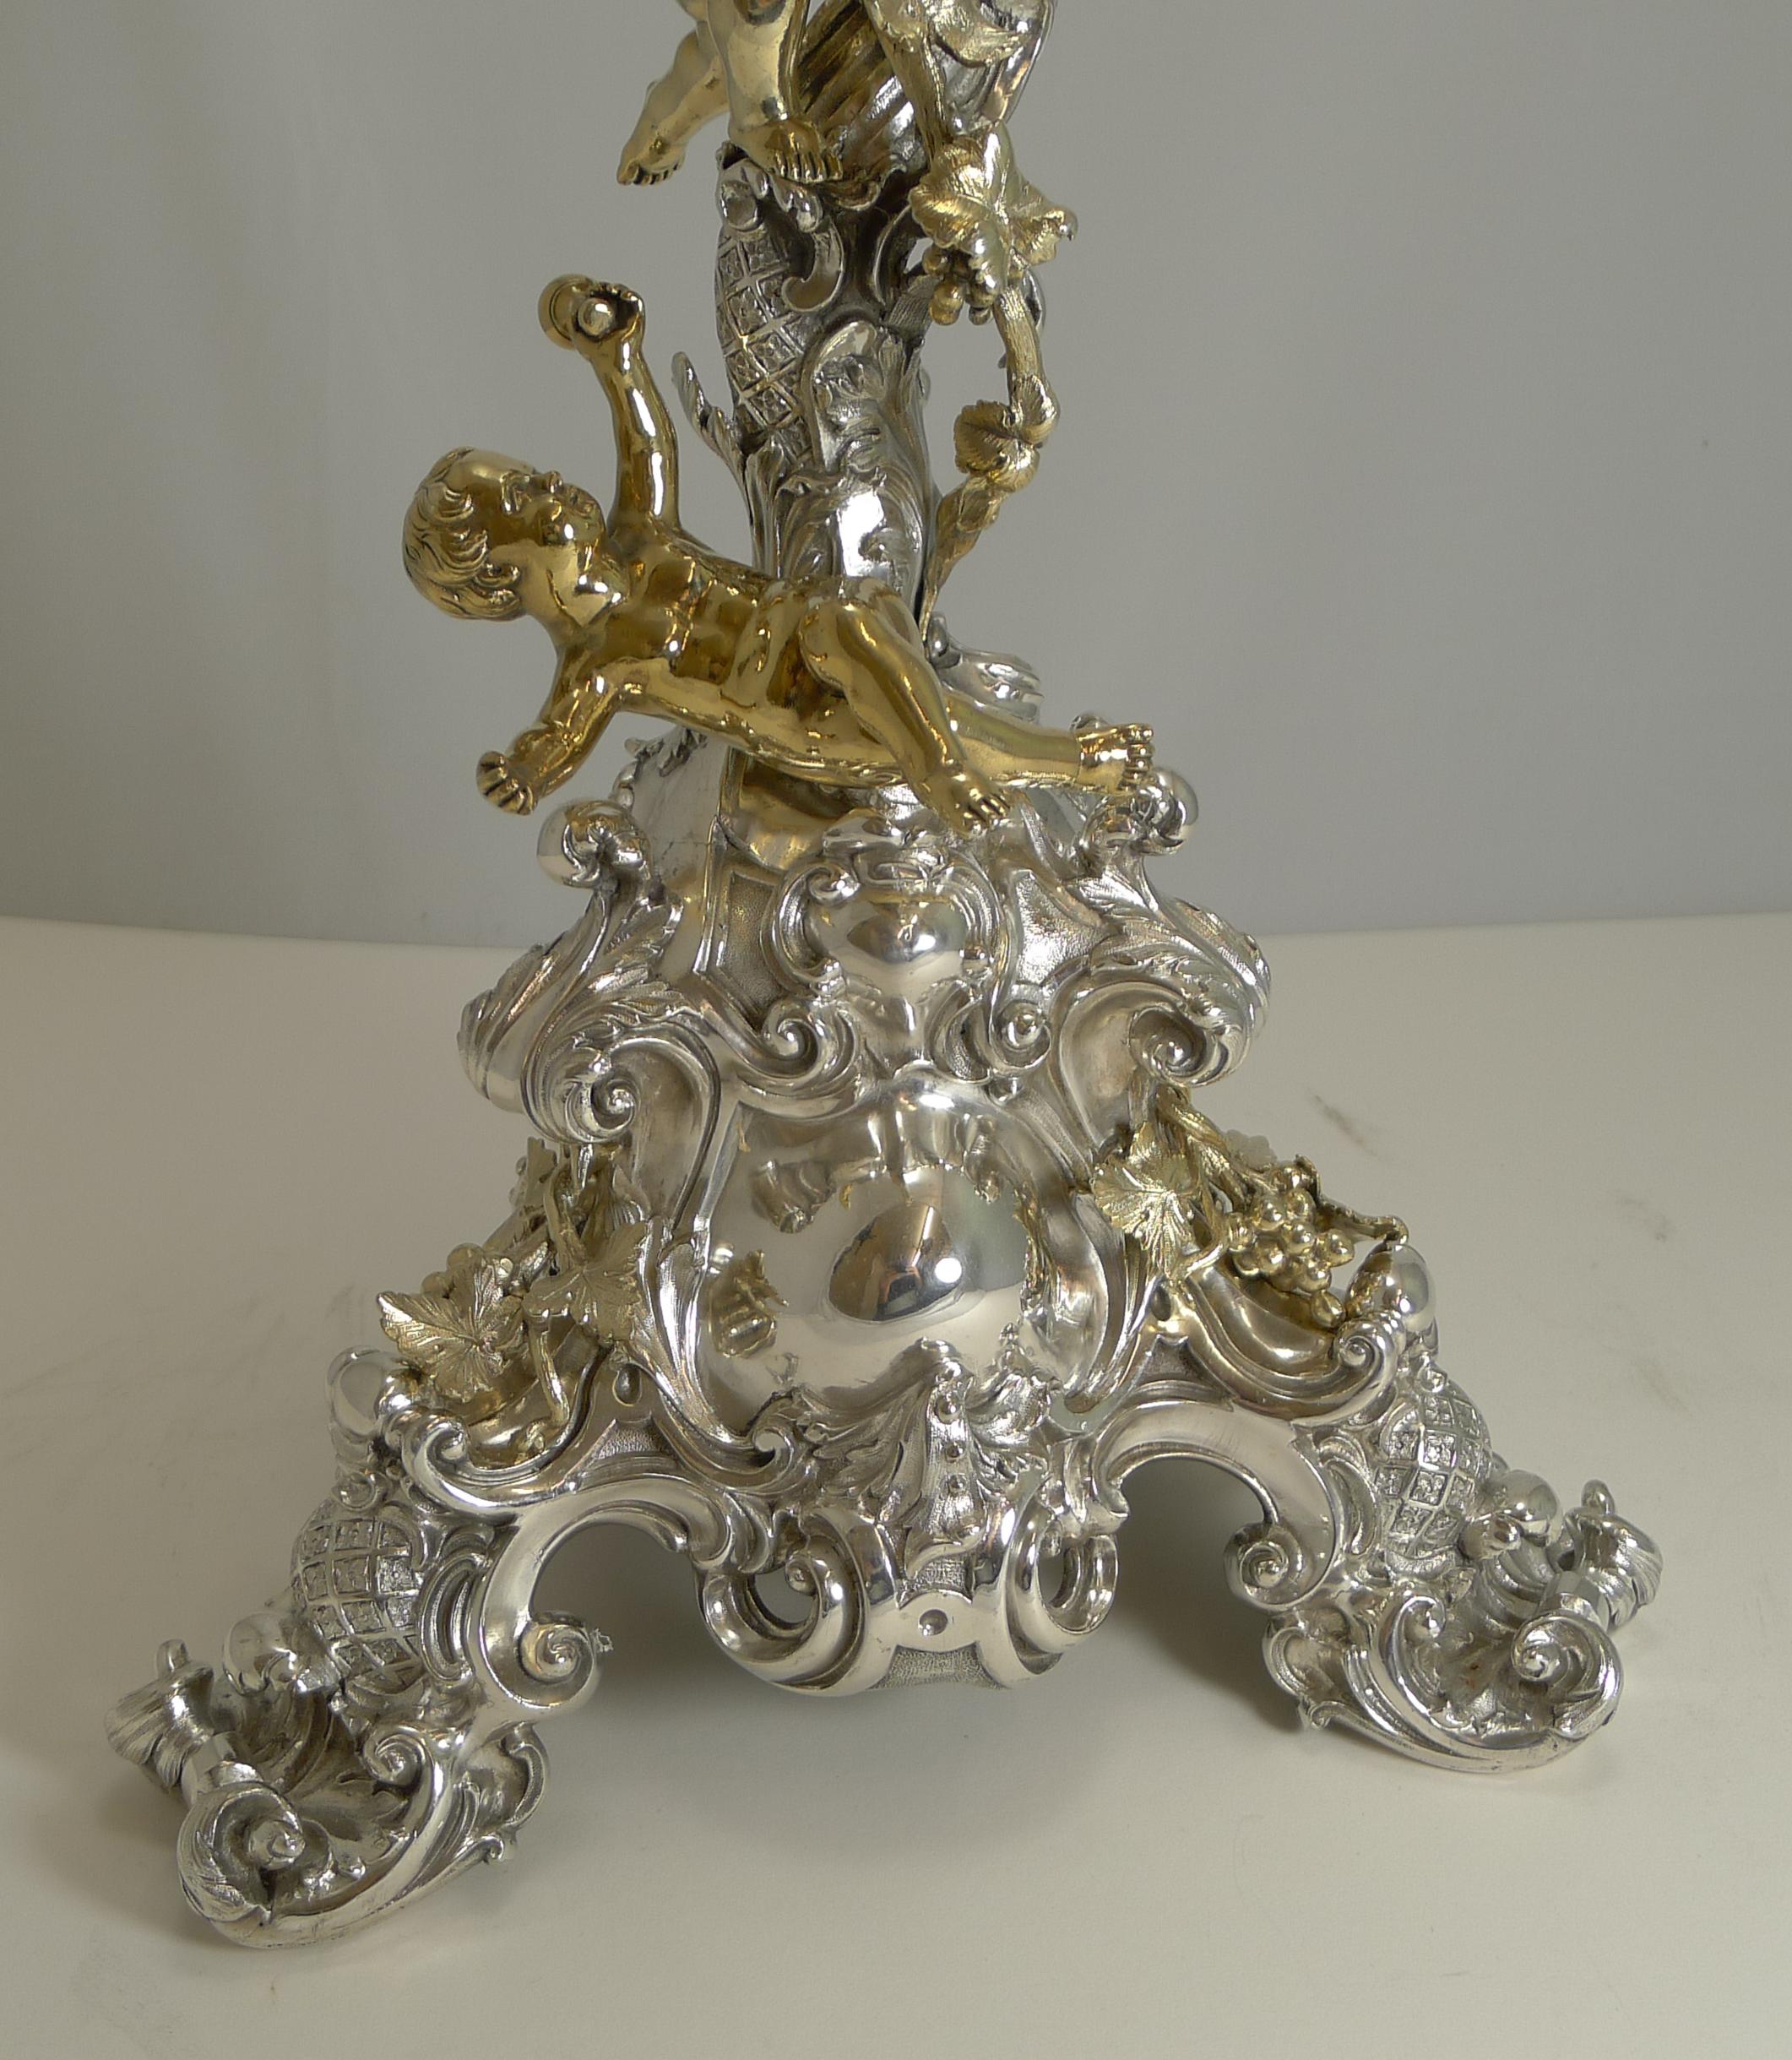 A most important antique English silver plated centerpiece / six-light candelabra by the top-notch silversmith, Elkington and Co. with a date letter (F) for the year 1868.

In the Rococo revival style with abundant scroll and acanthus leaf